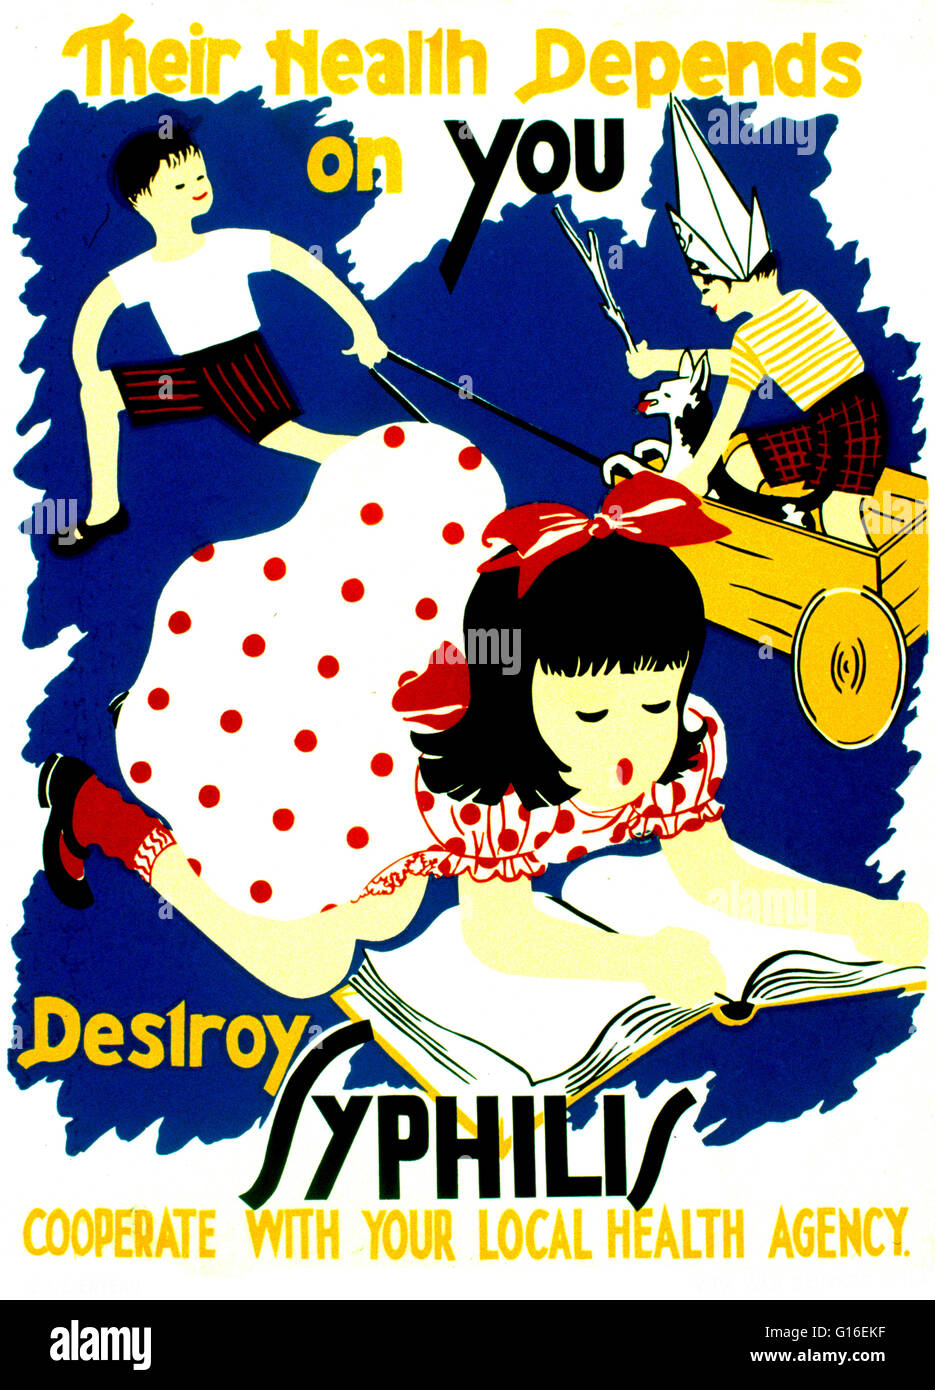 Entitled: 'Their health depends on you. Destroy syphilis'. Poster promoting eradication of syphilis, showing children playing and reading. The Federal Art Project (FAP) was the visual arts arm of the Great Depression era New Deal Works Progress Administra Stock Photo